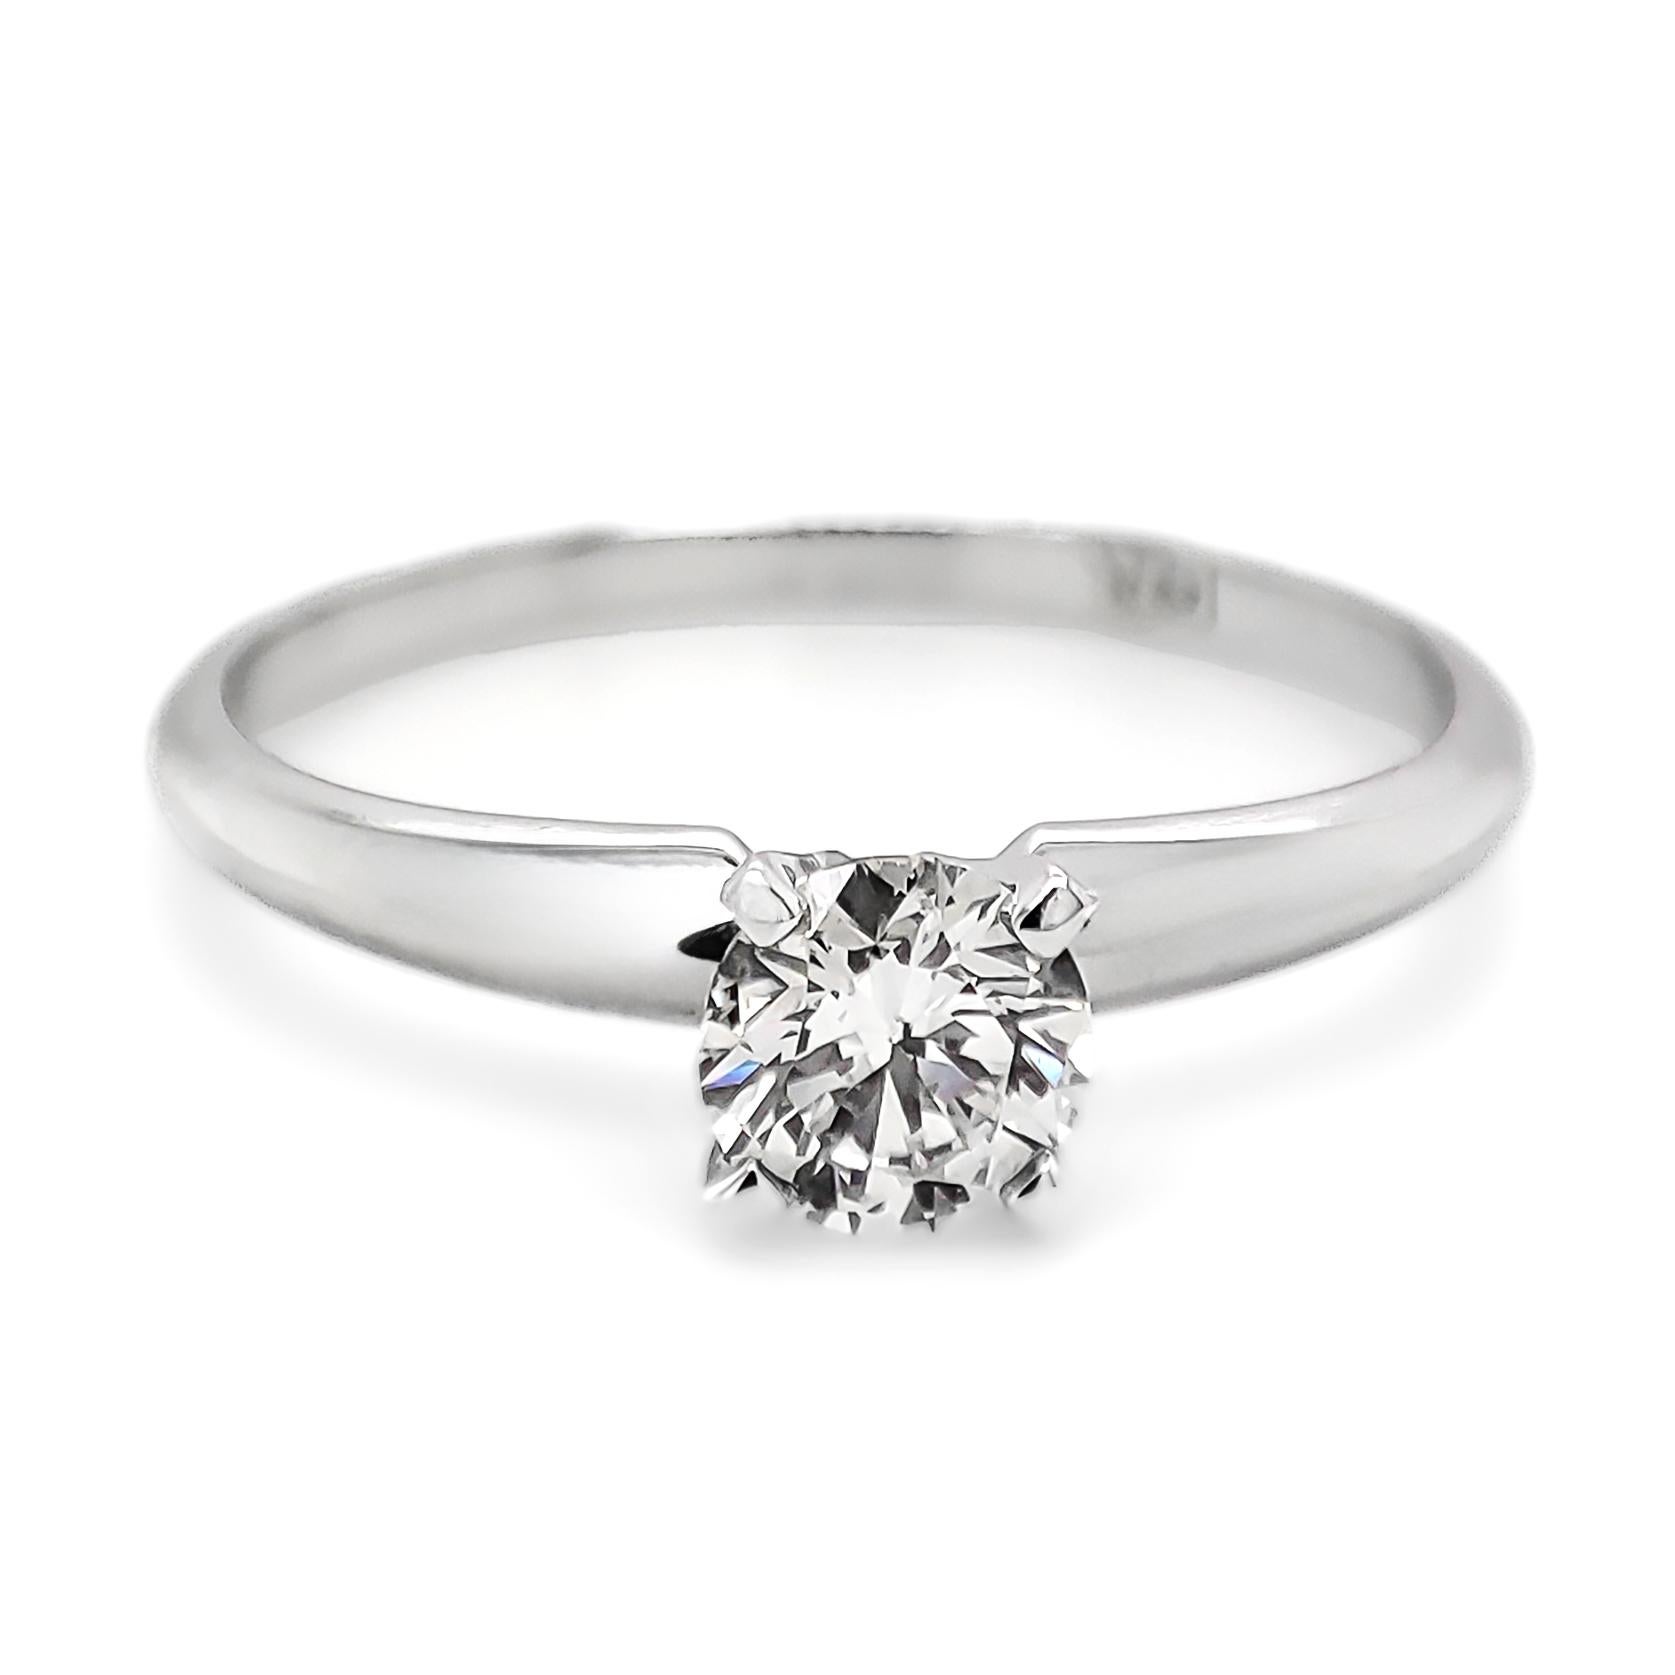 FOR US CUSTOMER NO VAT!

This elegant ring features a dazzling 0.40 carat diamond with exceptional clarity VS2 and a brilliant. The diamond is set in a classic 14K white gold band, adding a touch of timeless sophistication.

With a size of 7 US,